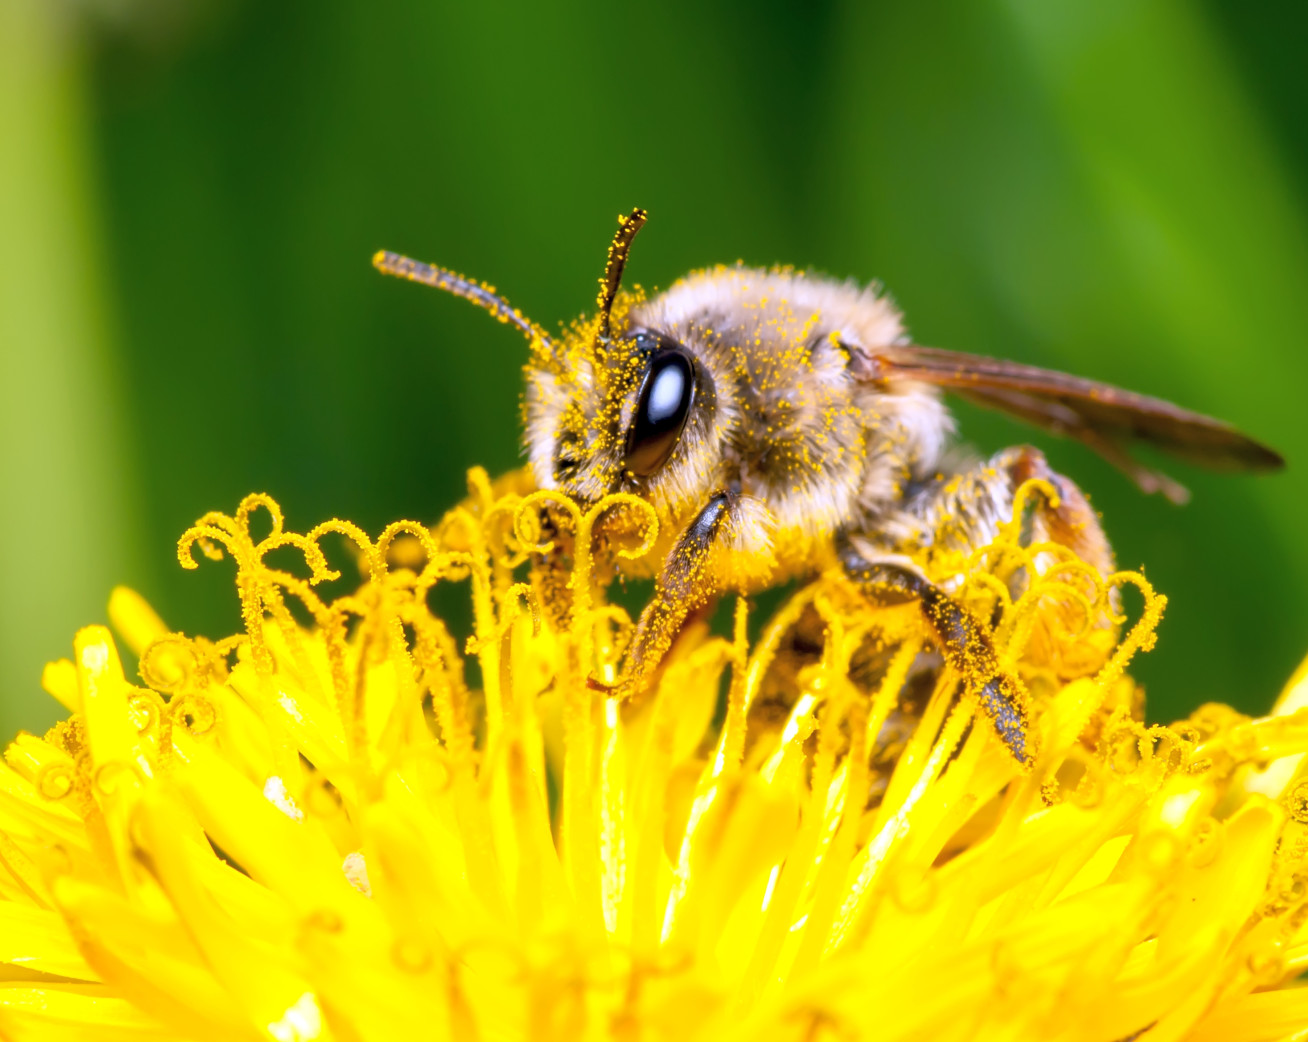 Up close photo of a bee landed on a yellow dandelion flower